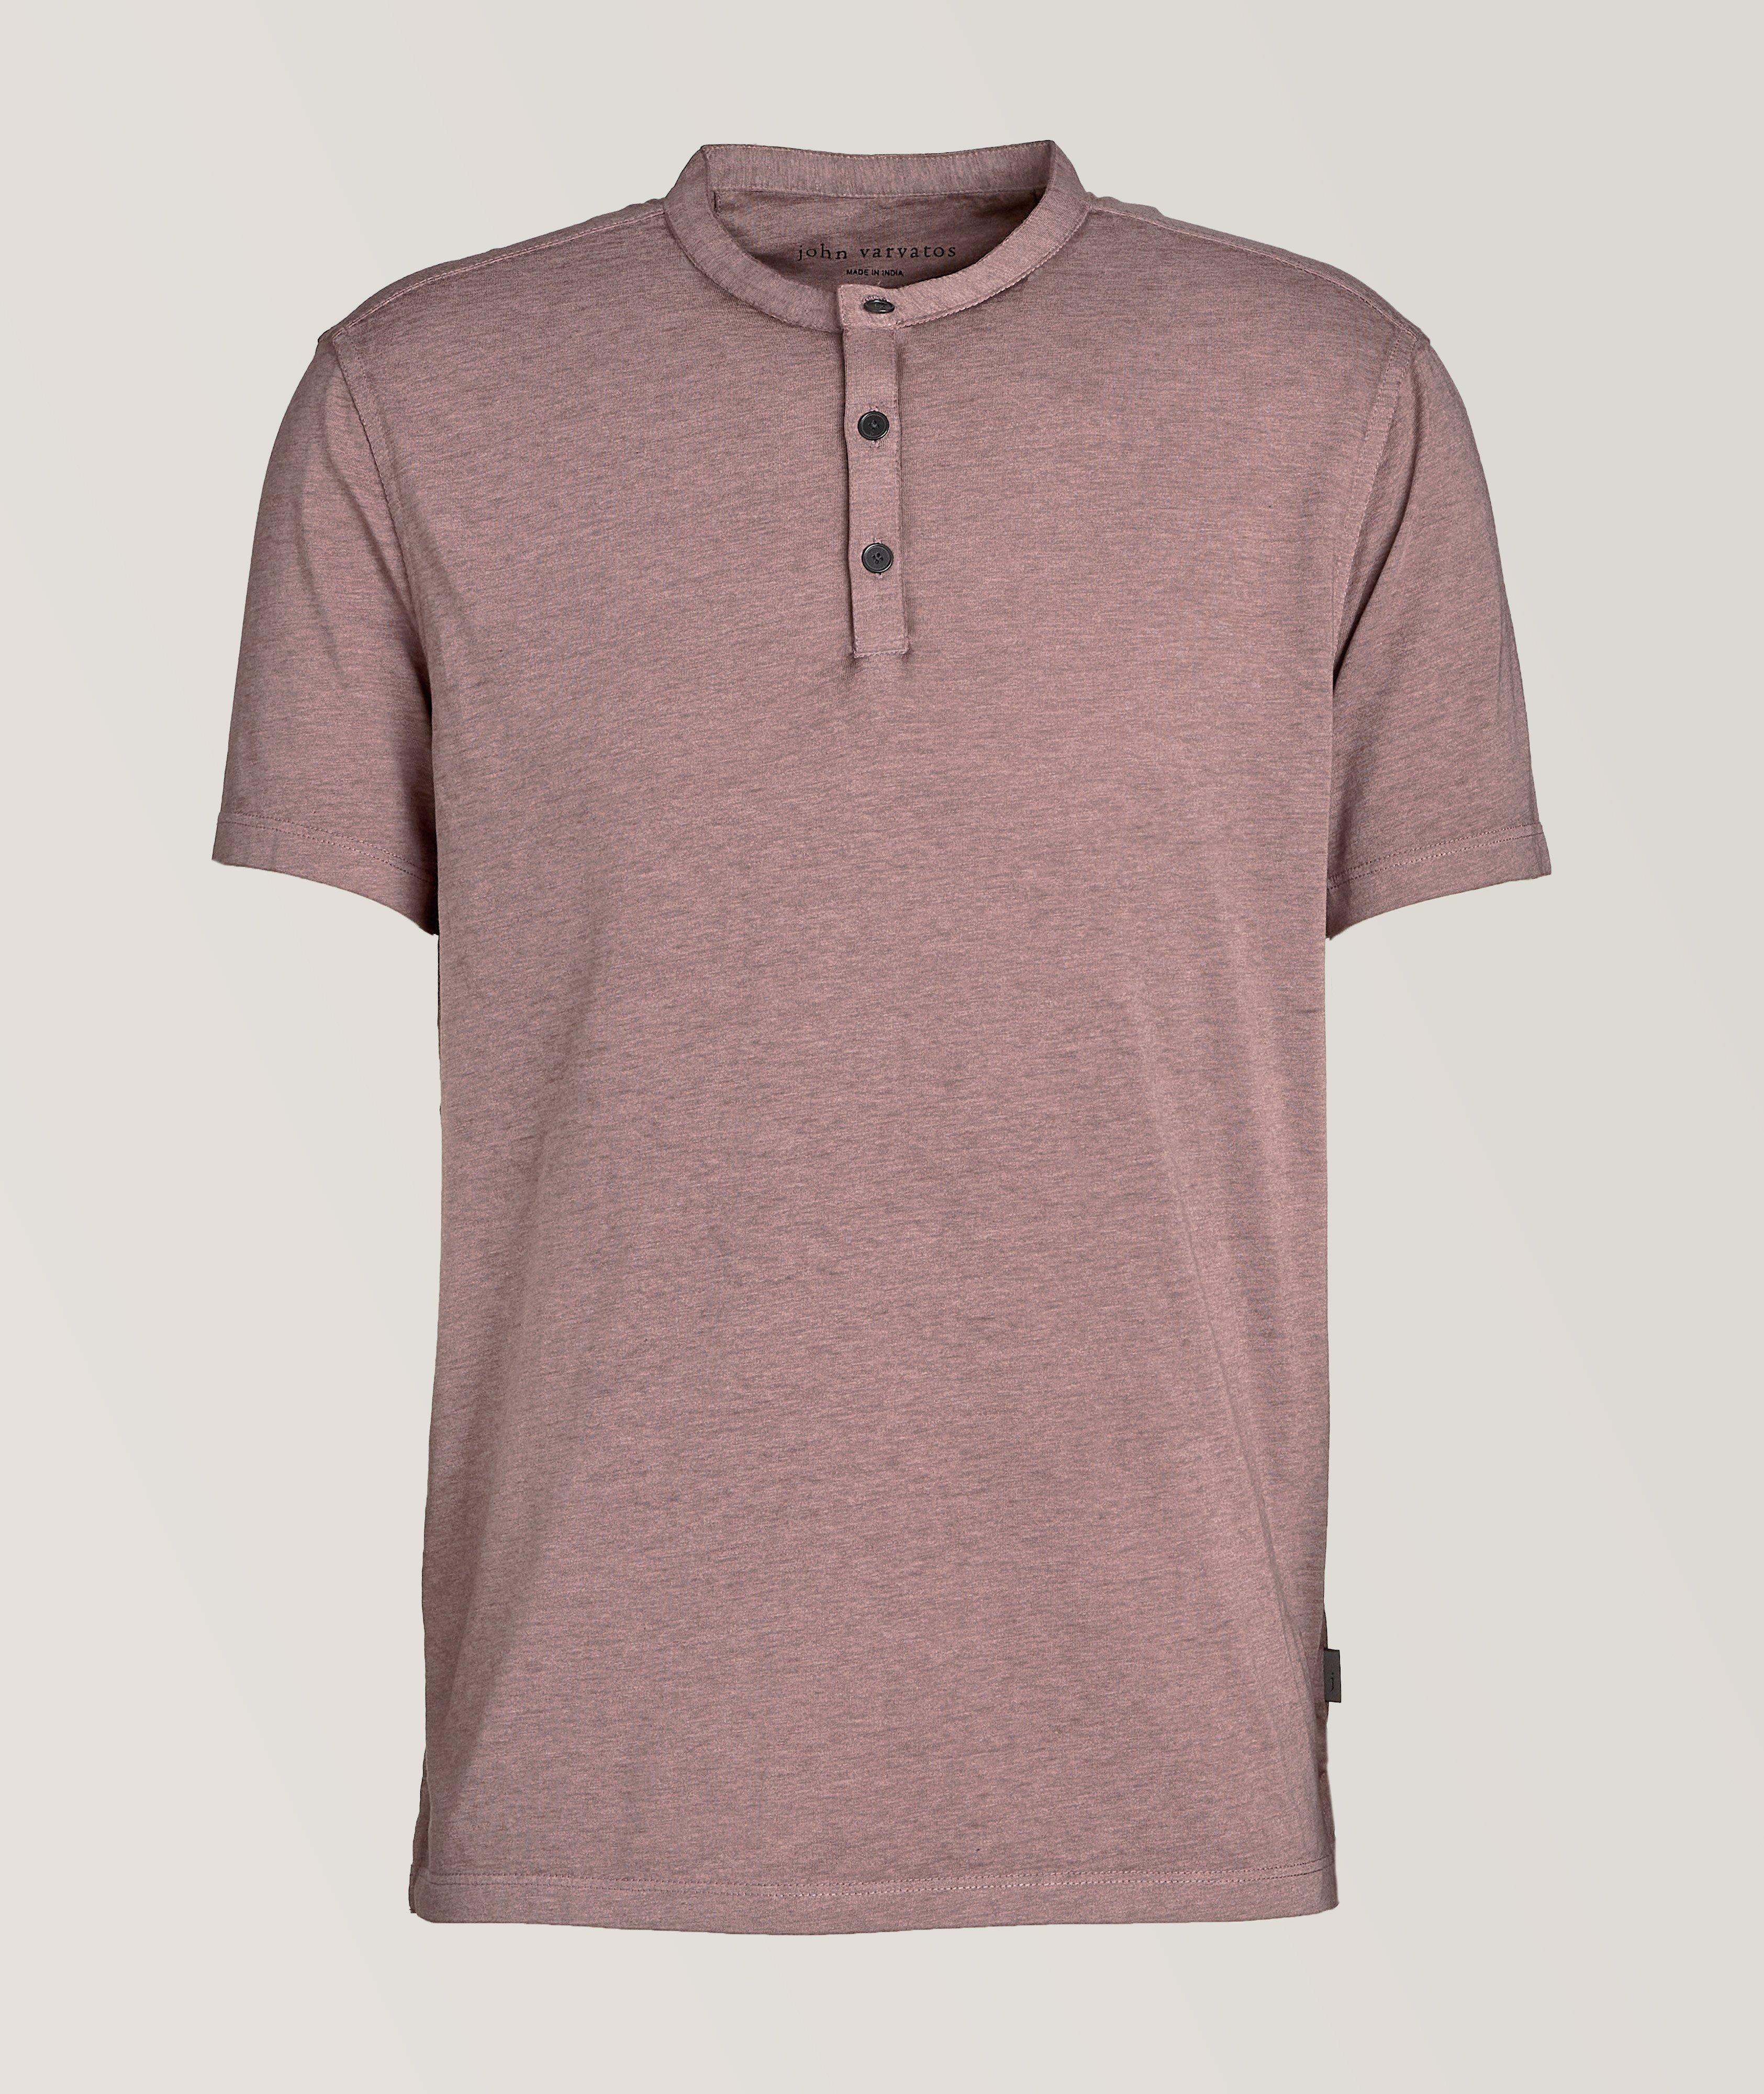 Heathered Cotton-Blend Henley  image 0